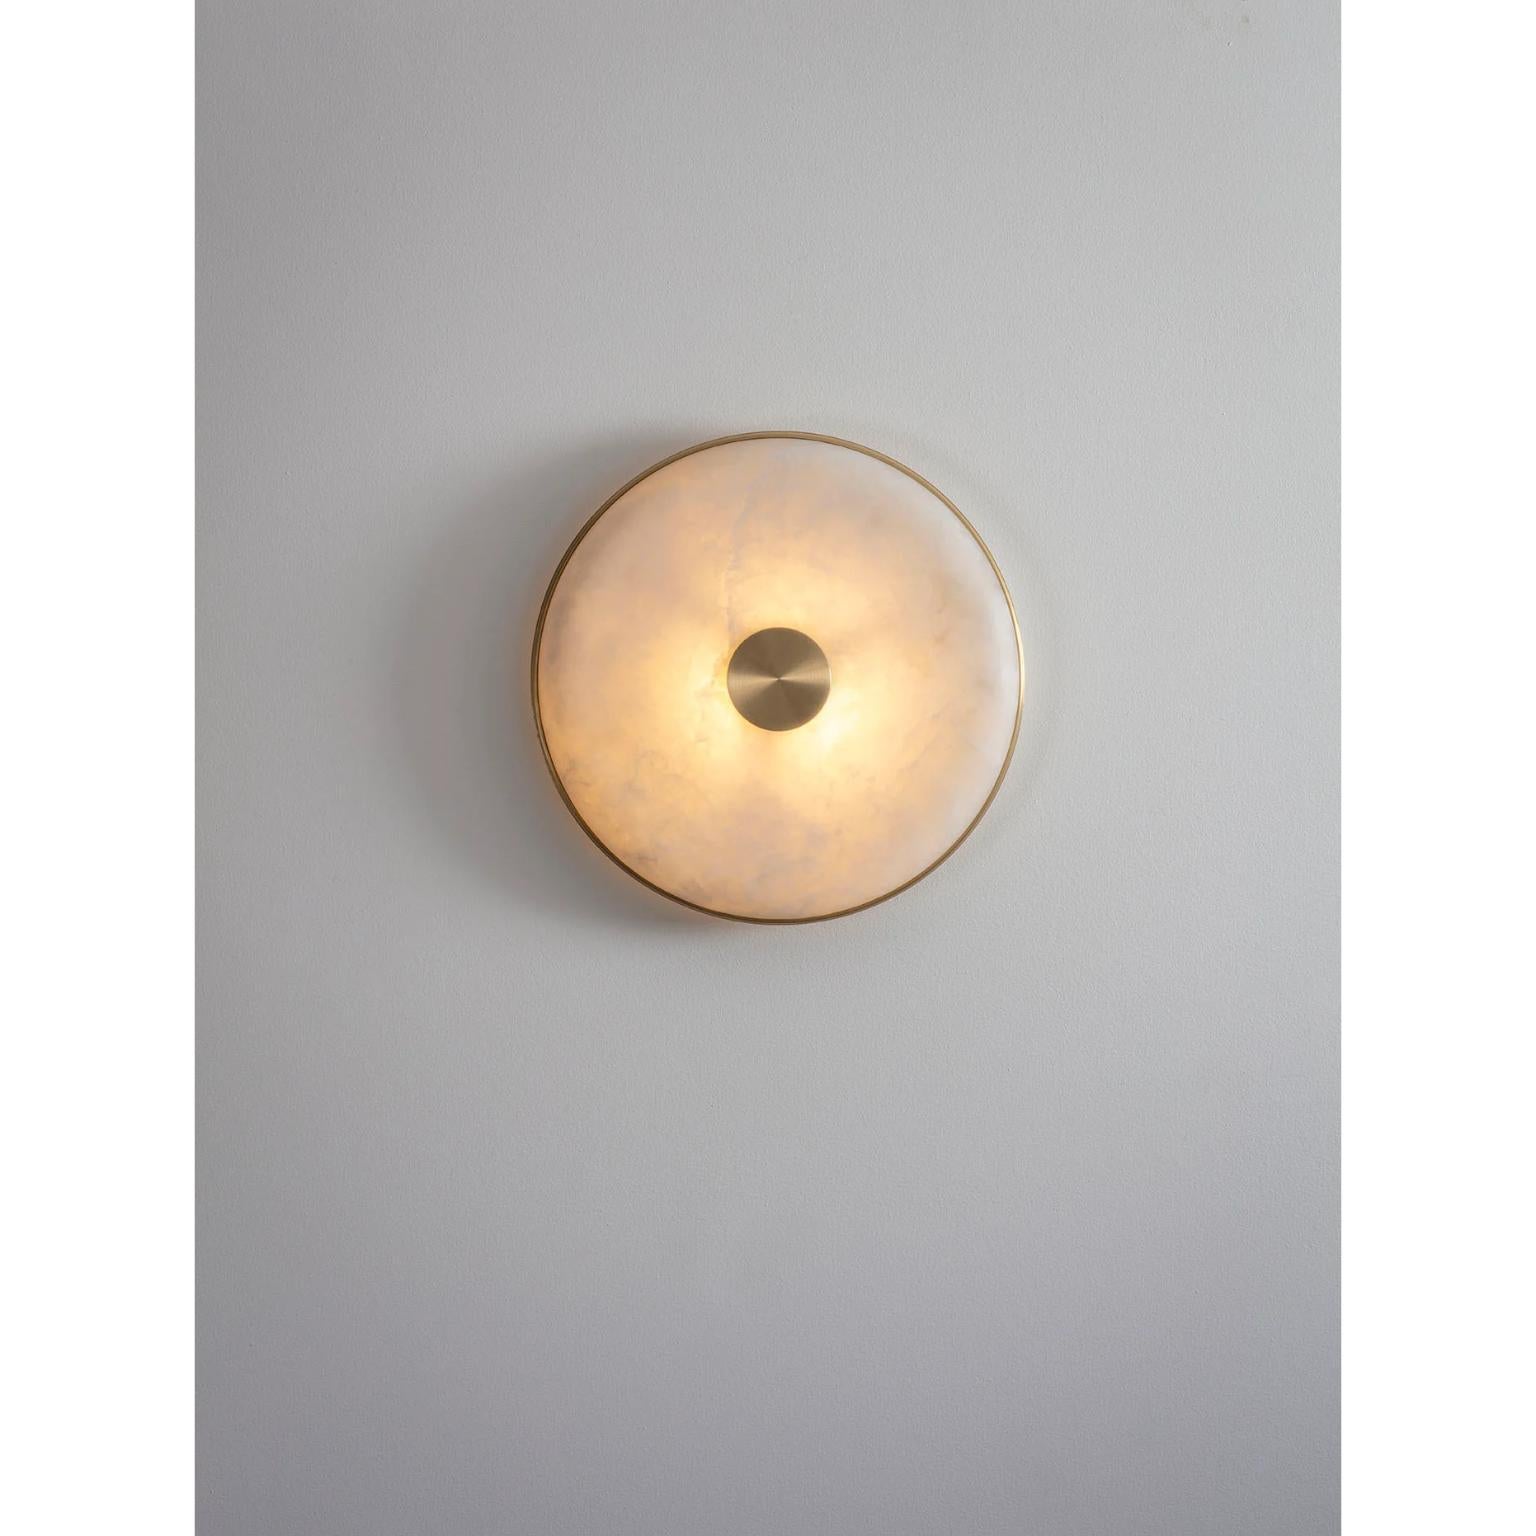 Beran Brushed Brass Large Wall Light by Bert Frank
Dimensions: D 6,5 x W 36 x H 36 cm.
Materials: Brass and alabaster.

Available in two different sizes. Available in different finishes and materials. Please contact us. 

Simple and elegant in form,